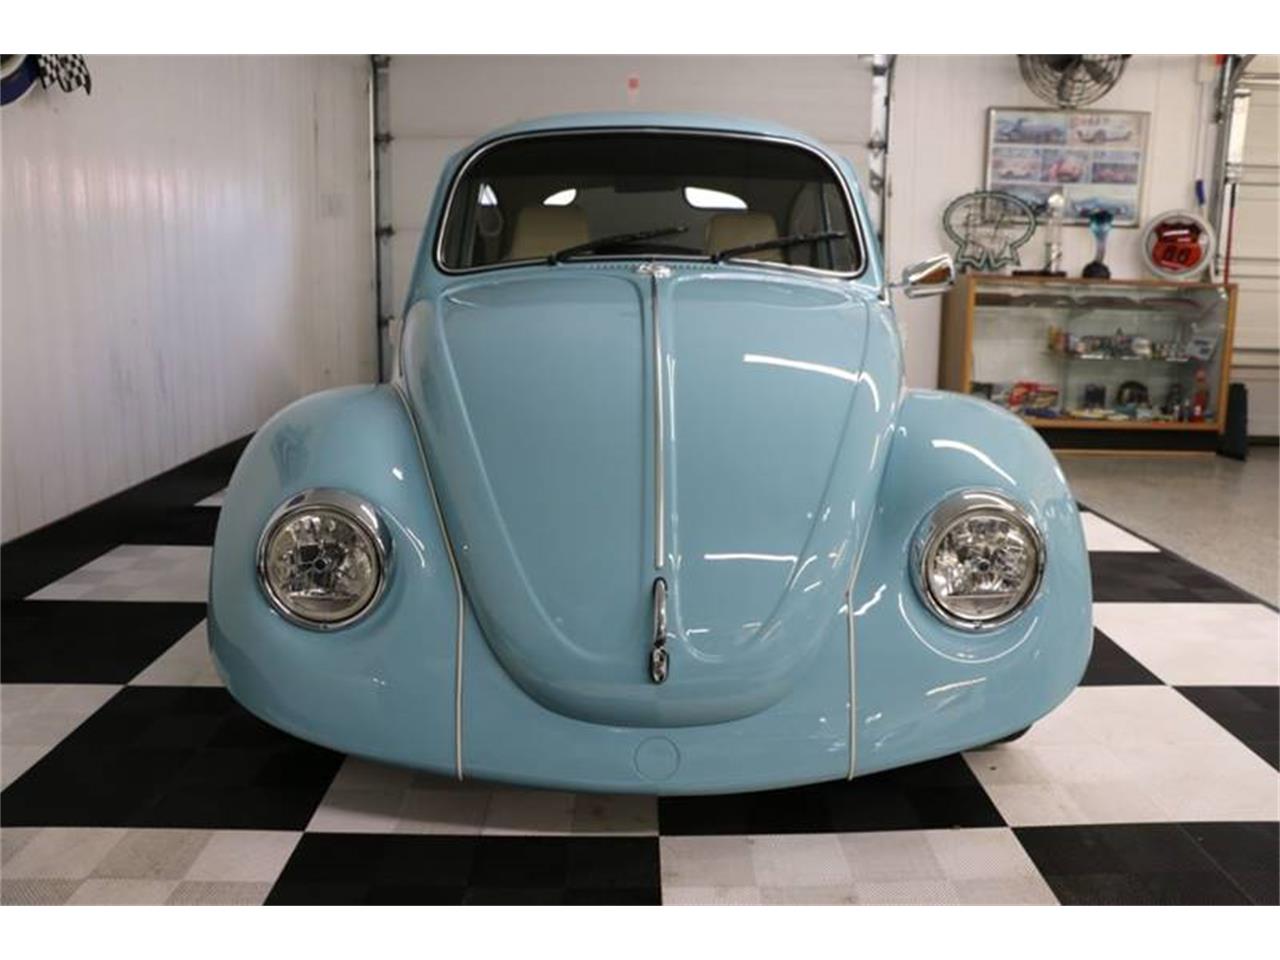 1974 Volkswagen Beetle for sale in Stratford, WI – photo 4